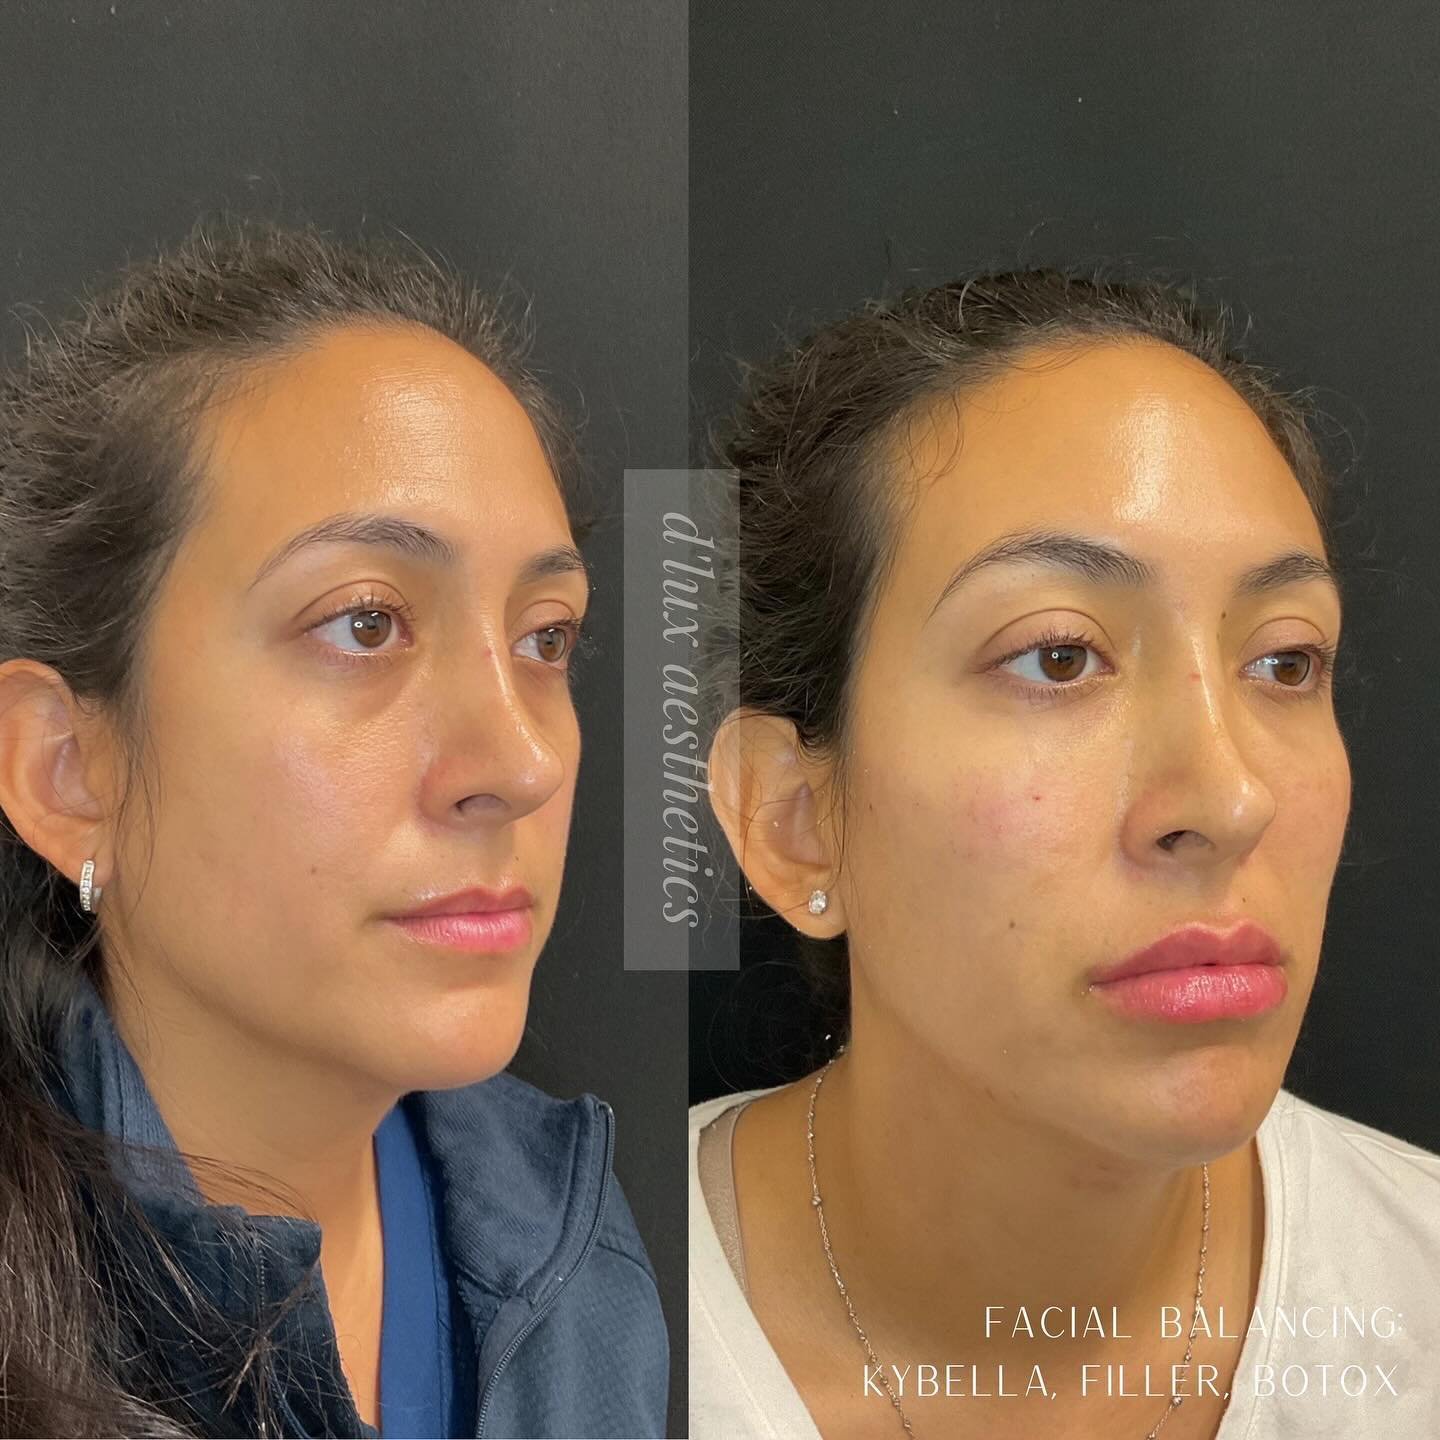 Aesthetics is a journey!  What did we treat on this beautiful patient? 

- 6 vials of Kybella to the submentum or &ldquo;double chin&rdquo;
- 4 syringes of Voluma to the cheeks 
- 1 syringe of Volbella to the tear troughs 
- 1st syringe to lips was V